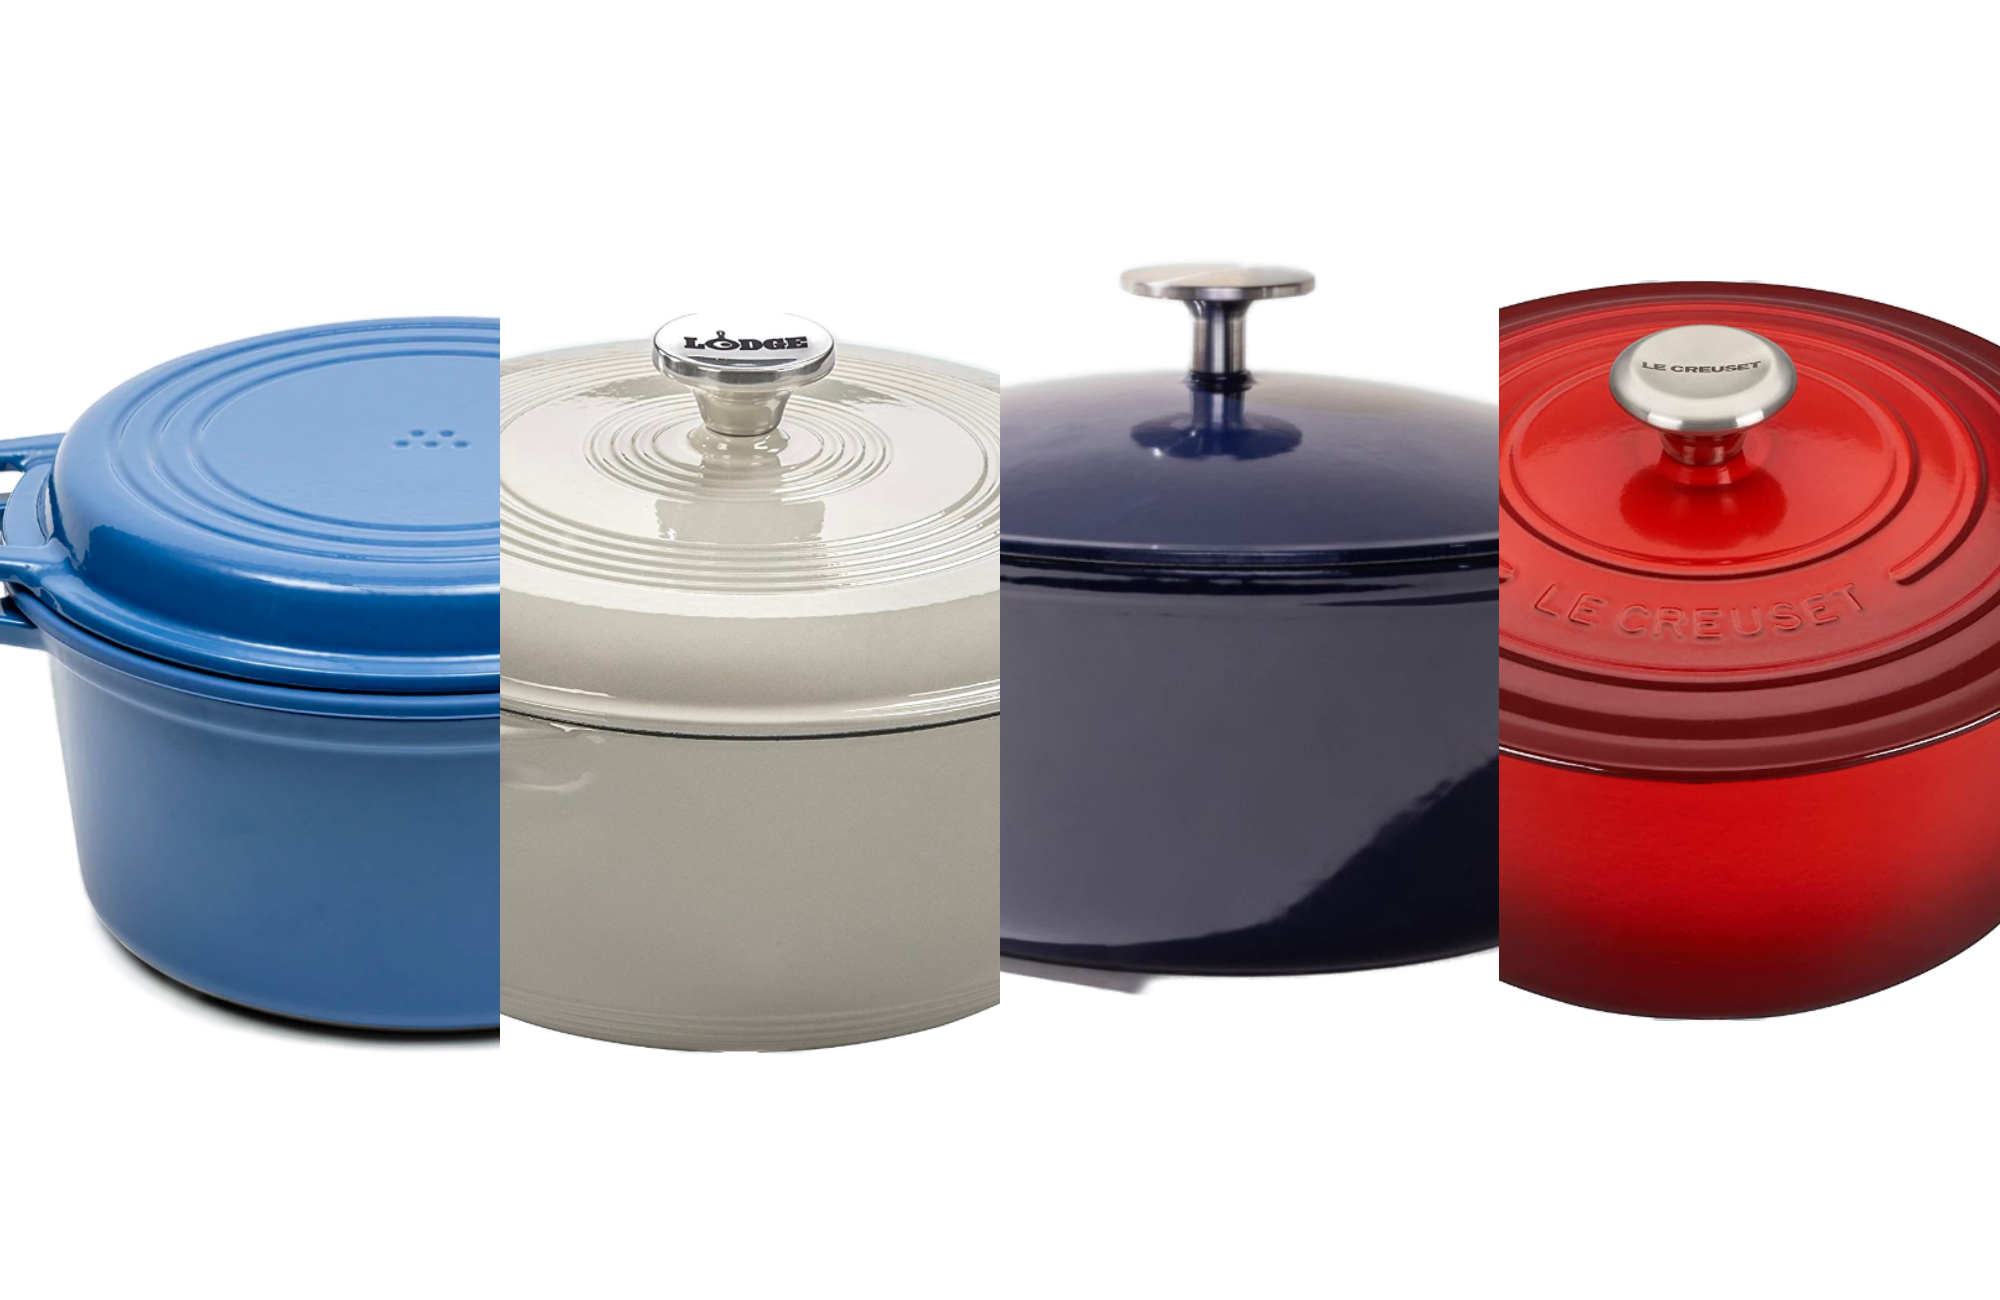 The best dutch ovens